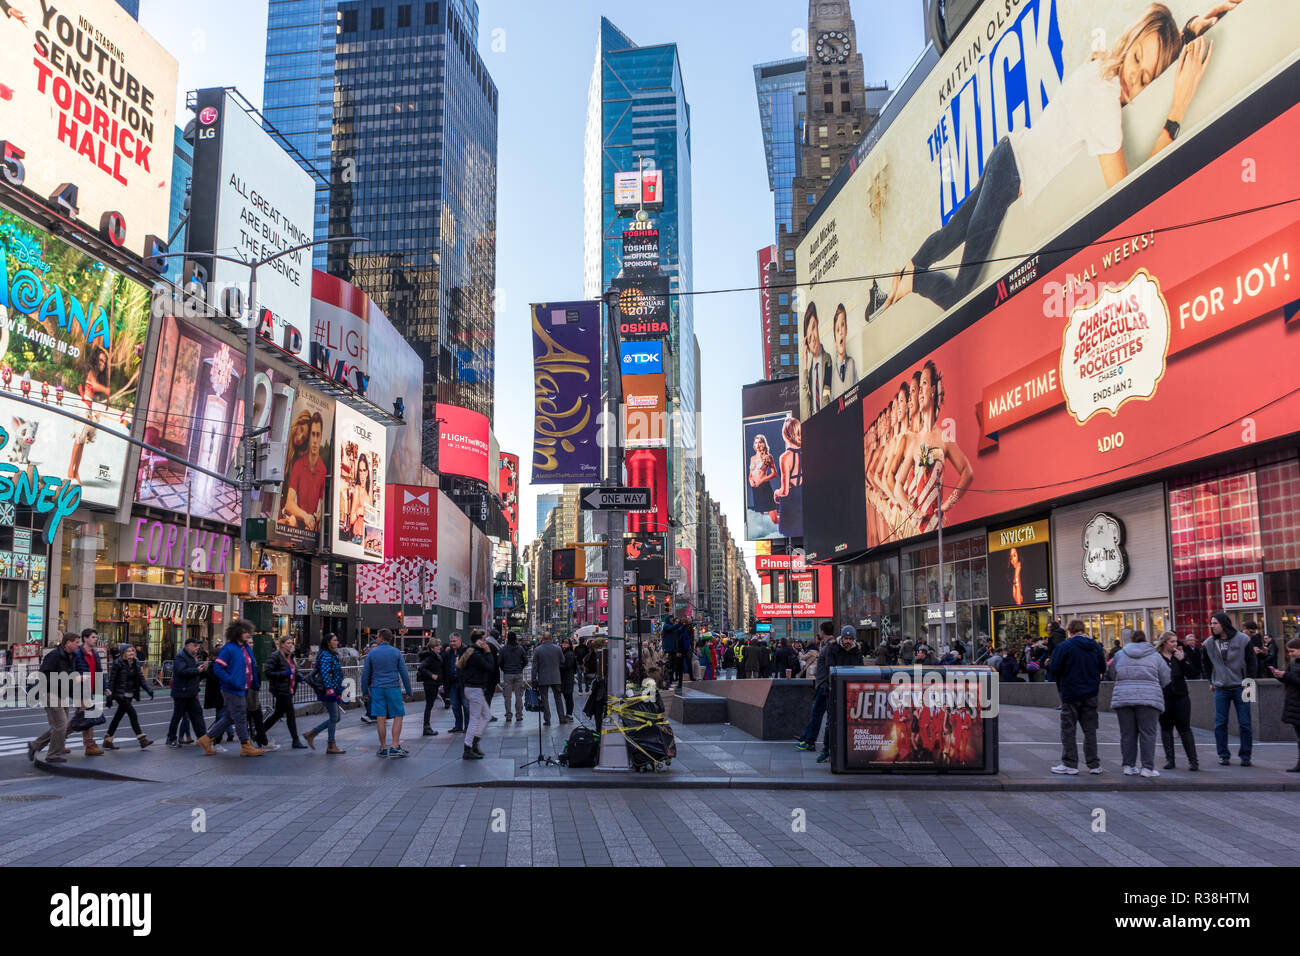 New York City, USA - December 25 2016: View TIme Square with no cars, a crowd of people walking by on the sidewalk, and multiple advertising signs in  Stock Photo